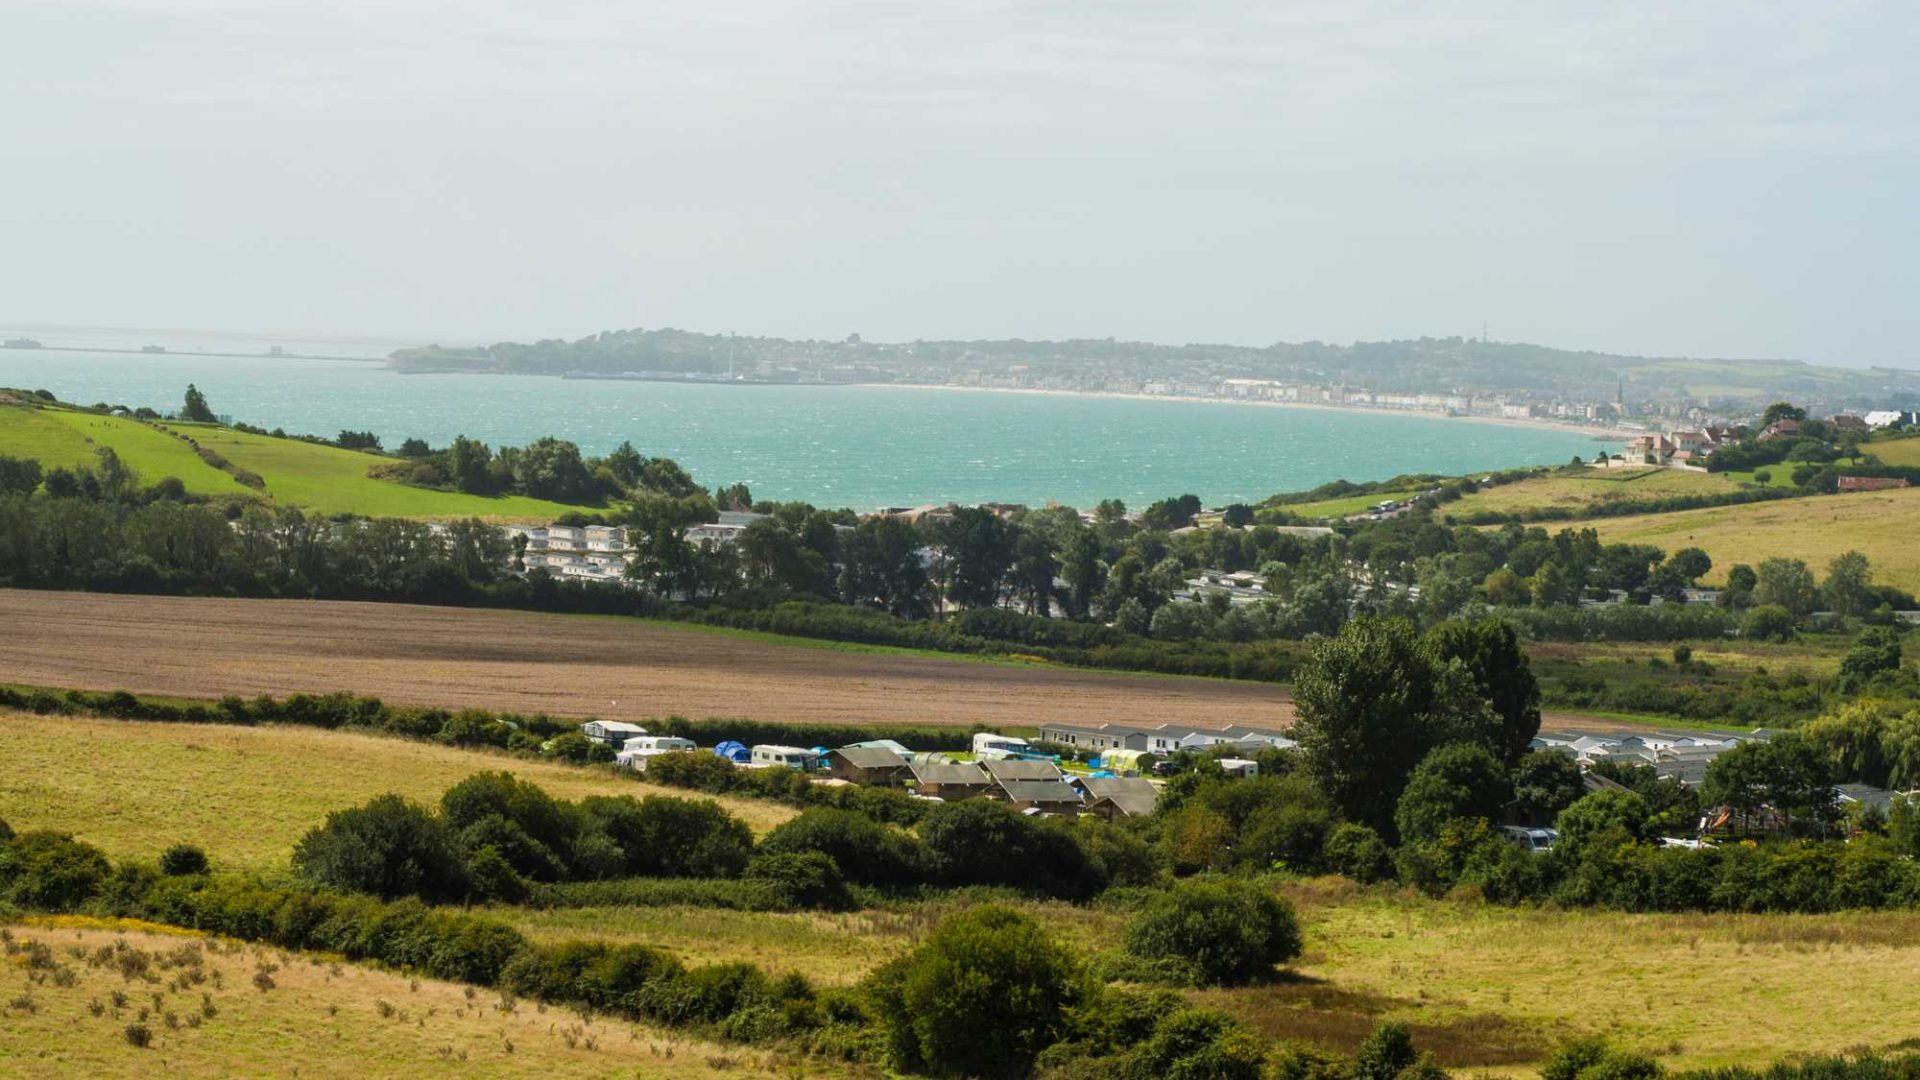 The view towards Weymouth